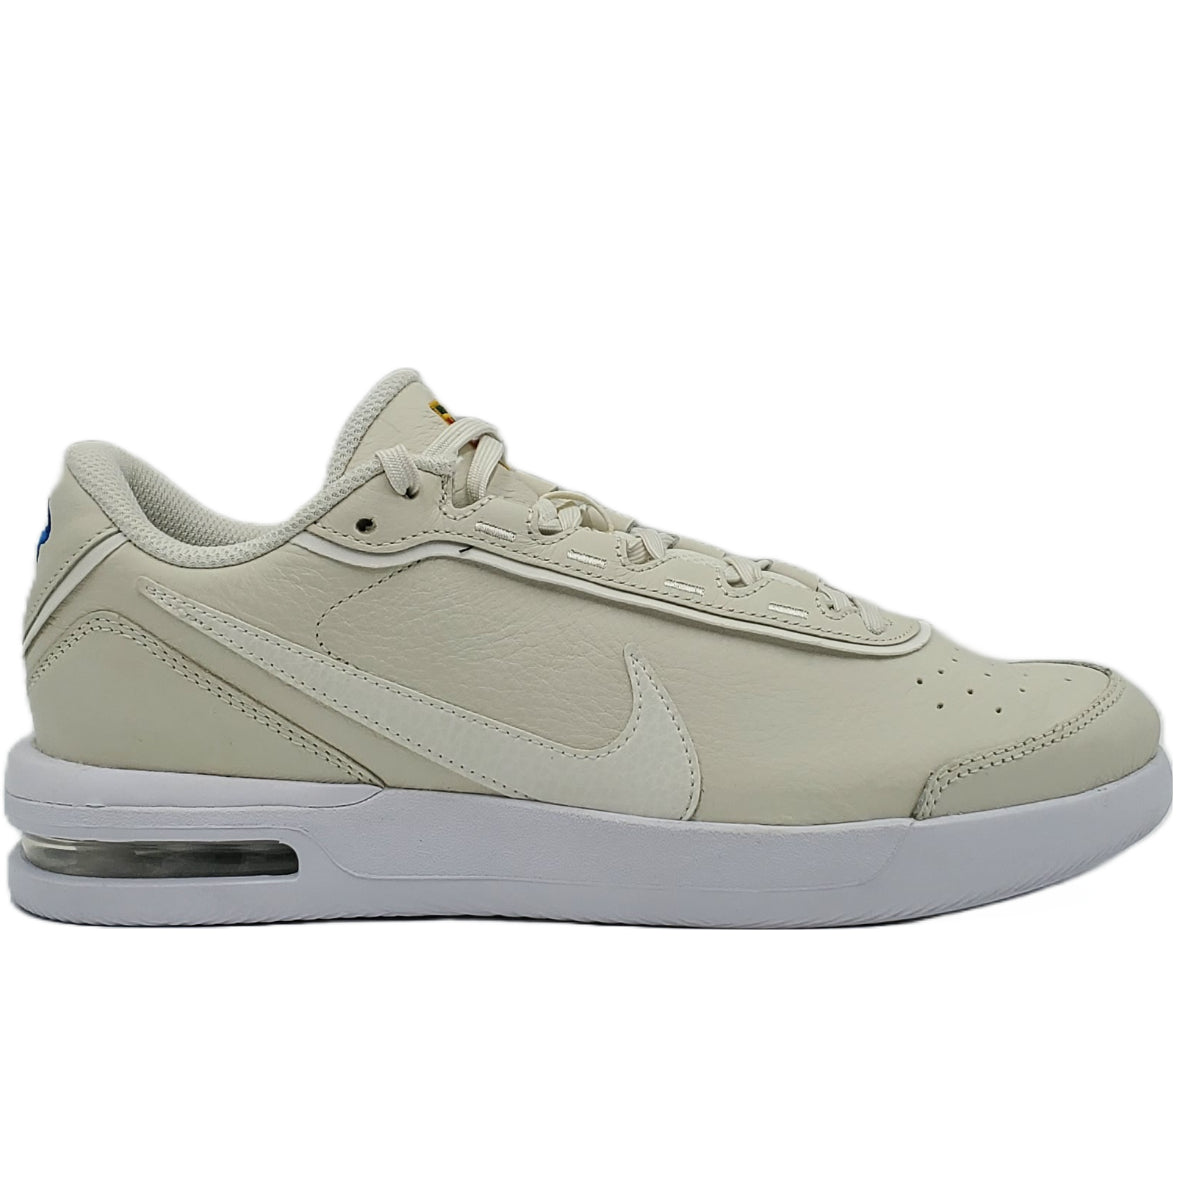 Nike Men's Air Max Wing Premium Tennis Shoes – All About Tennis